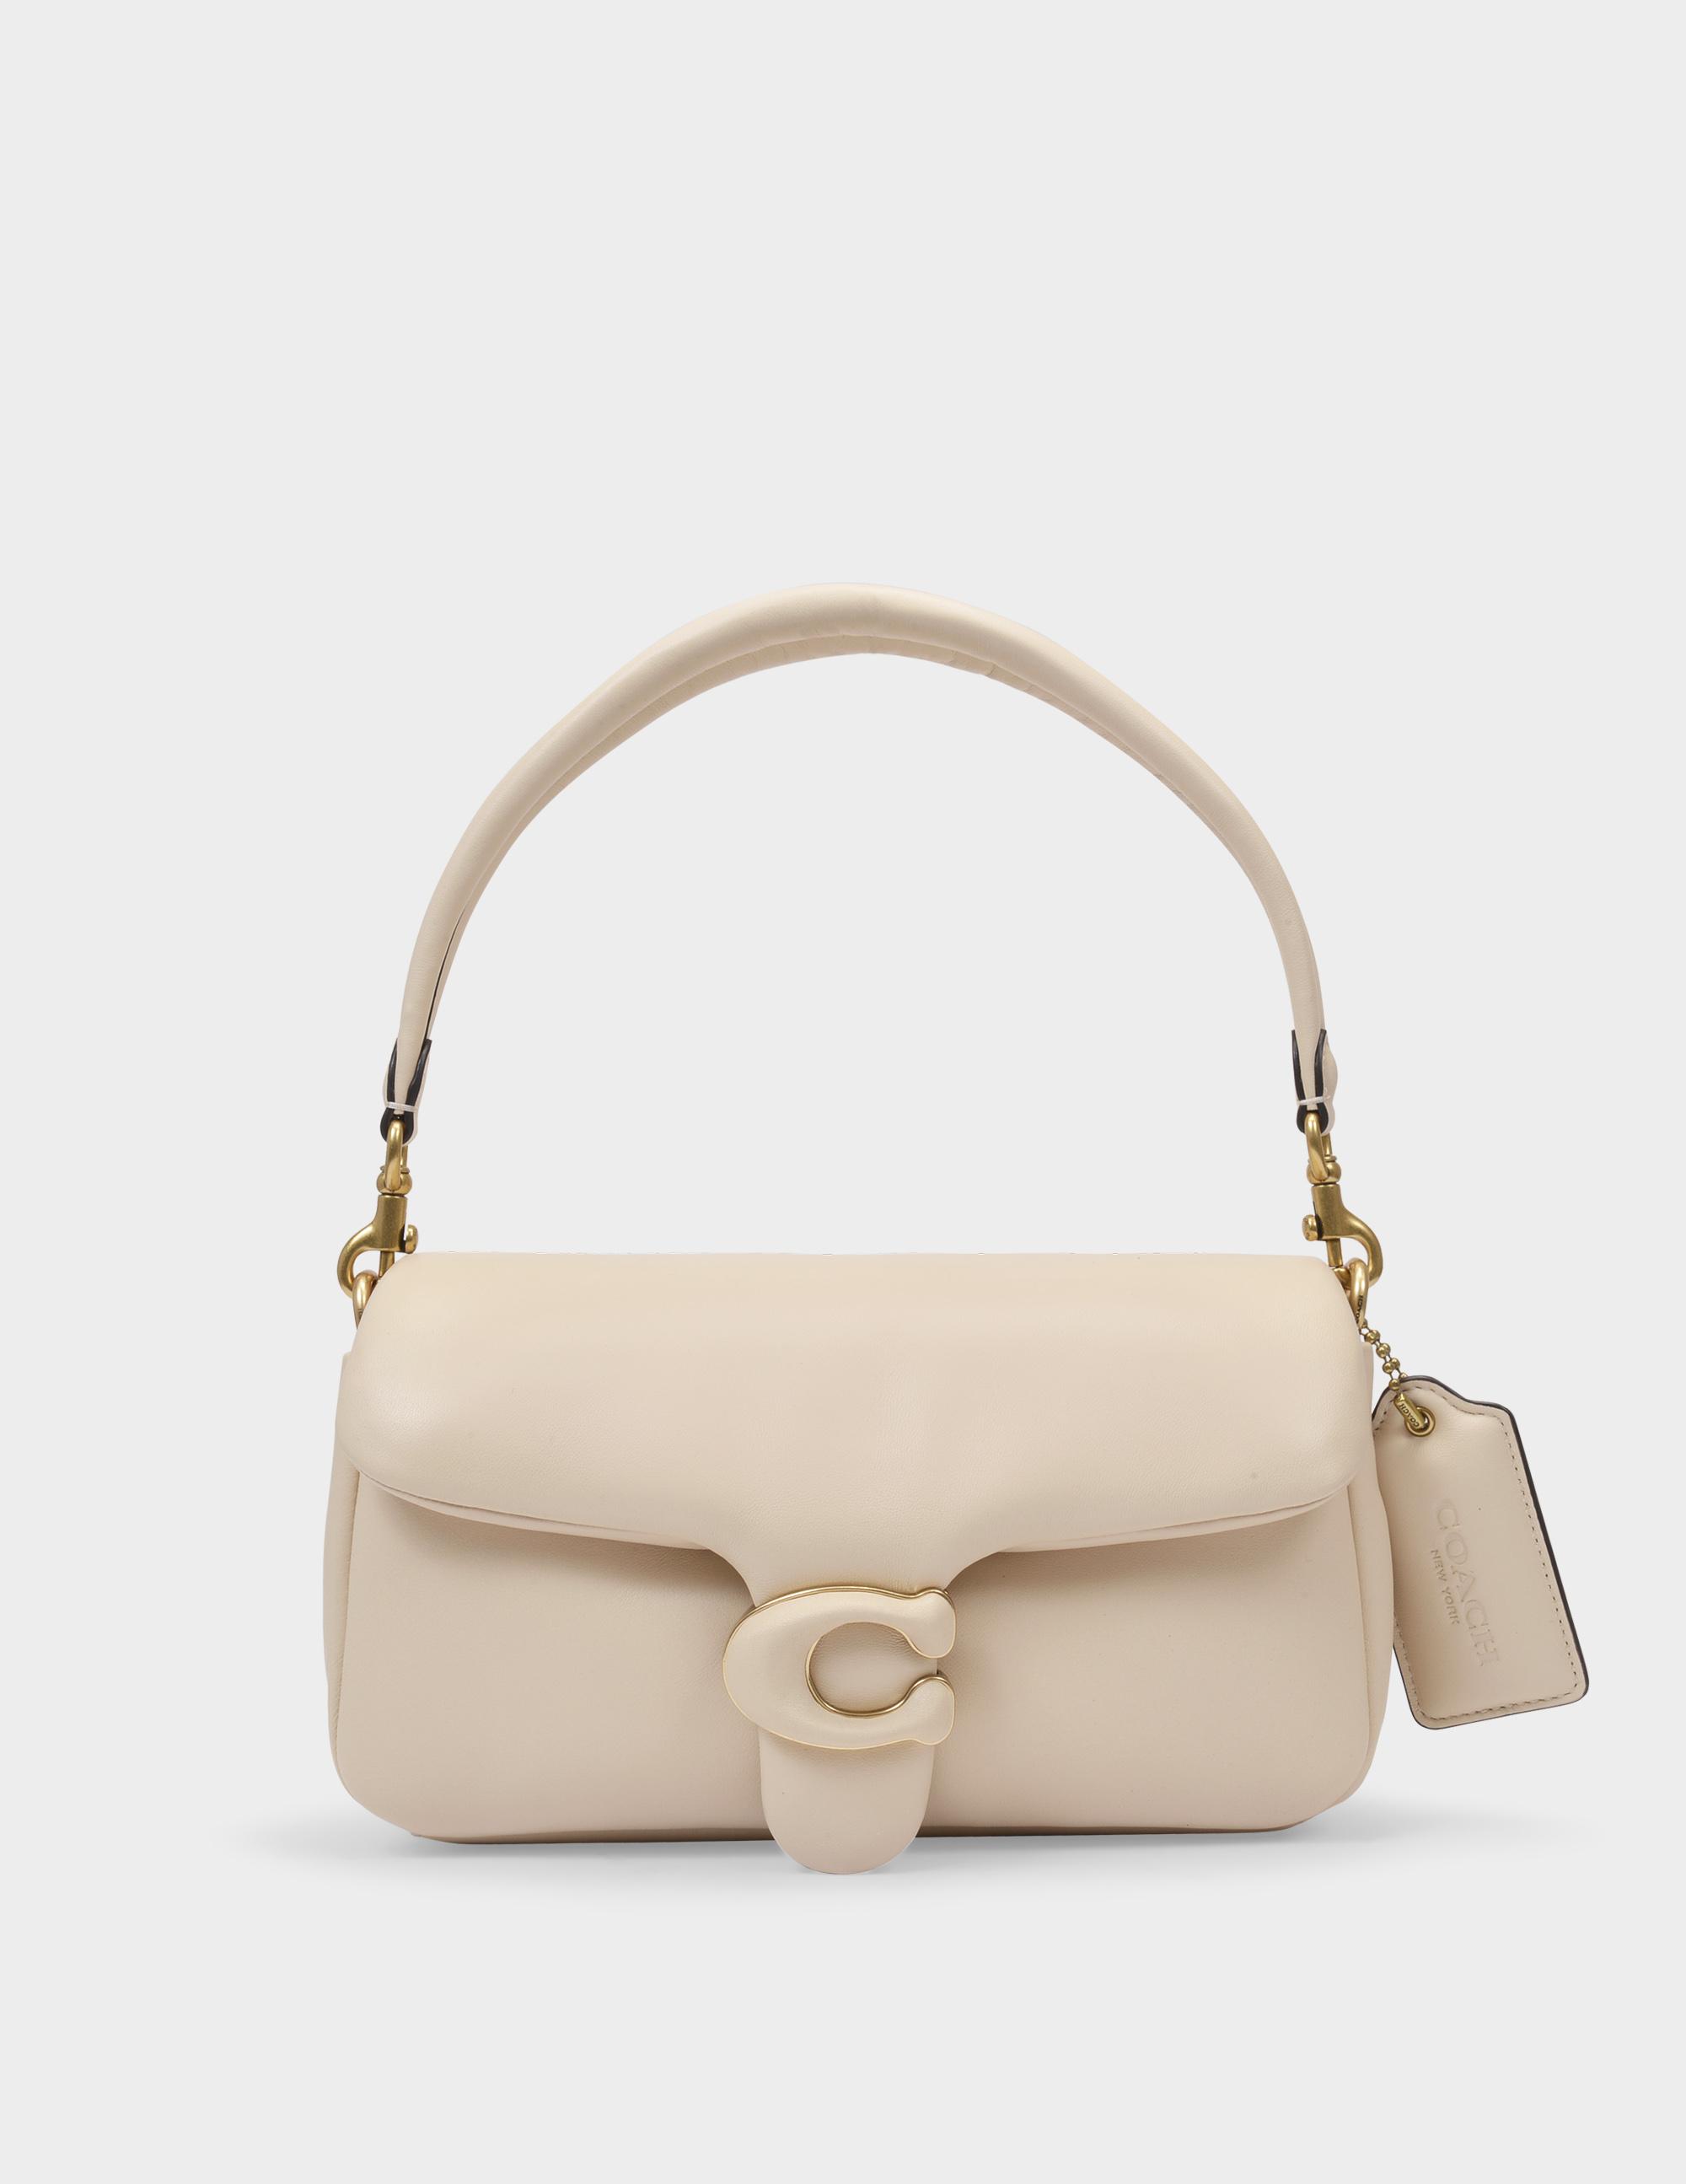 COACH Tabby Pillow Bag In Ivory Leather in Natural | Lyst